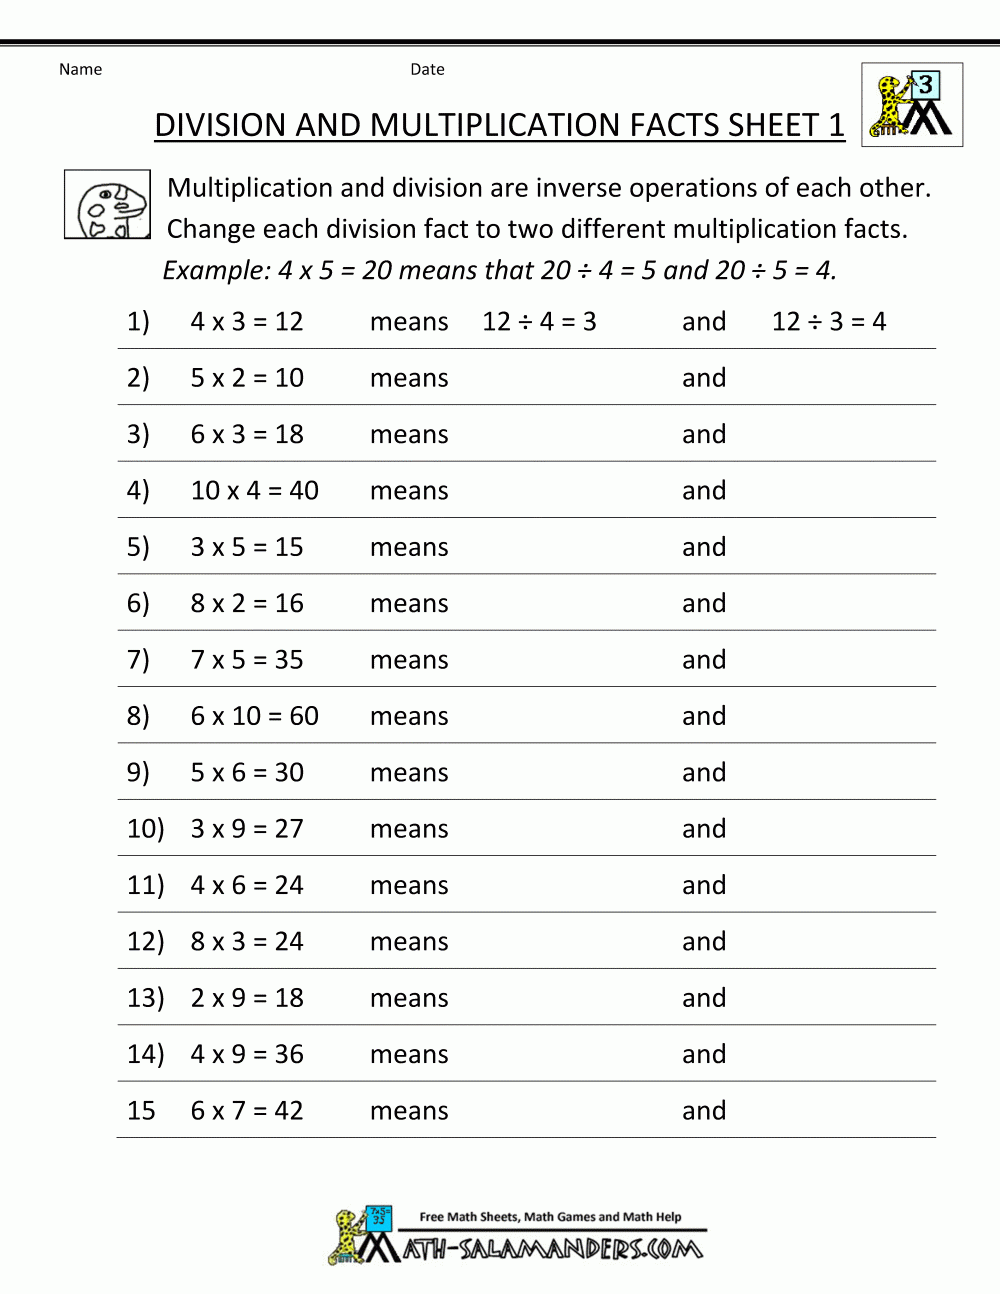 Division And Multiplication Facts Worksheets